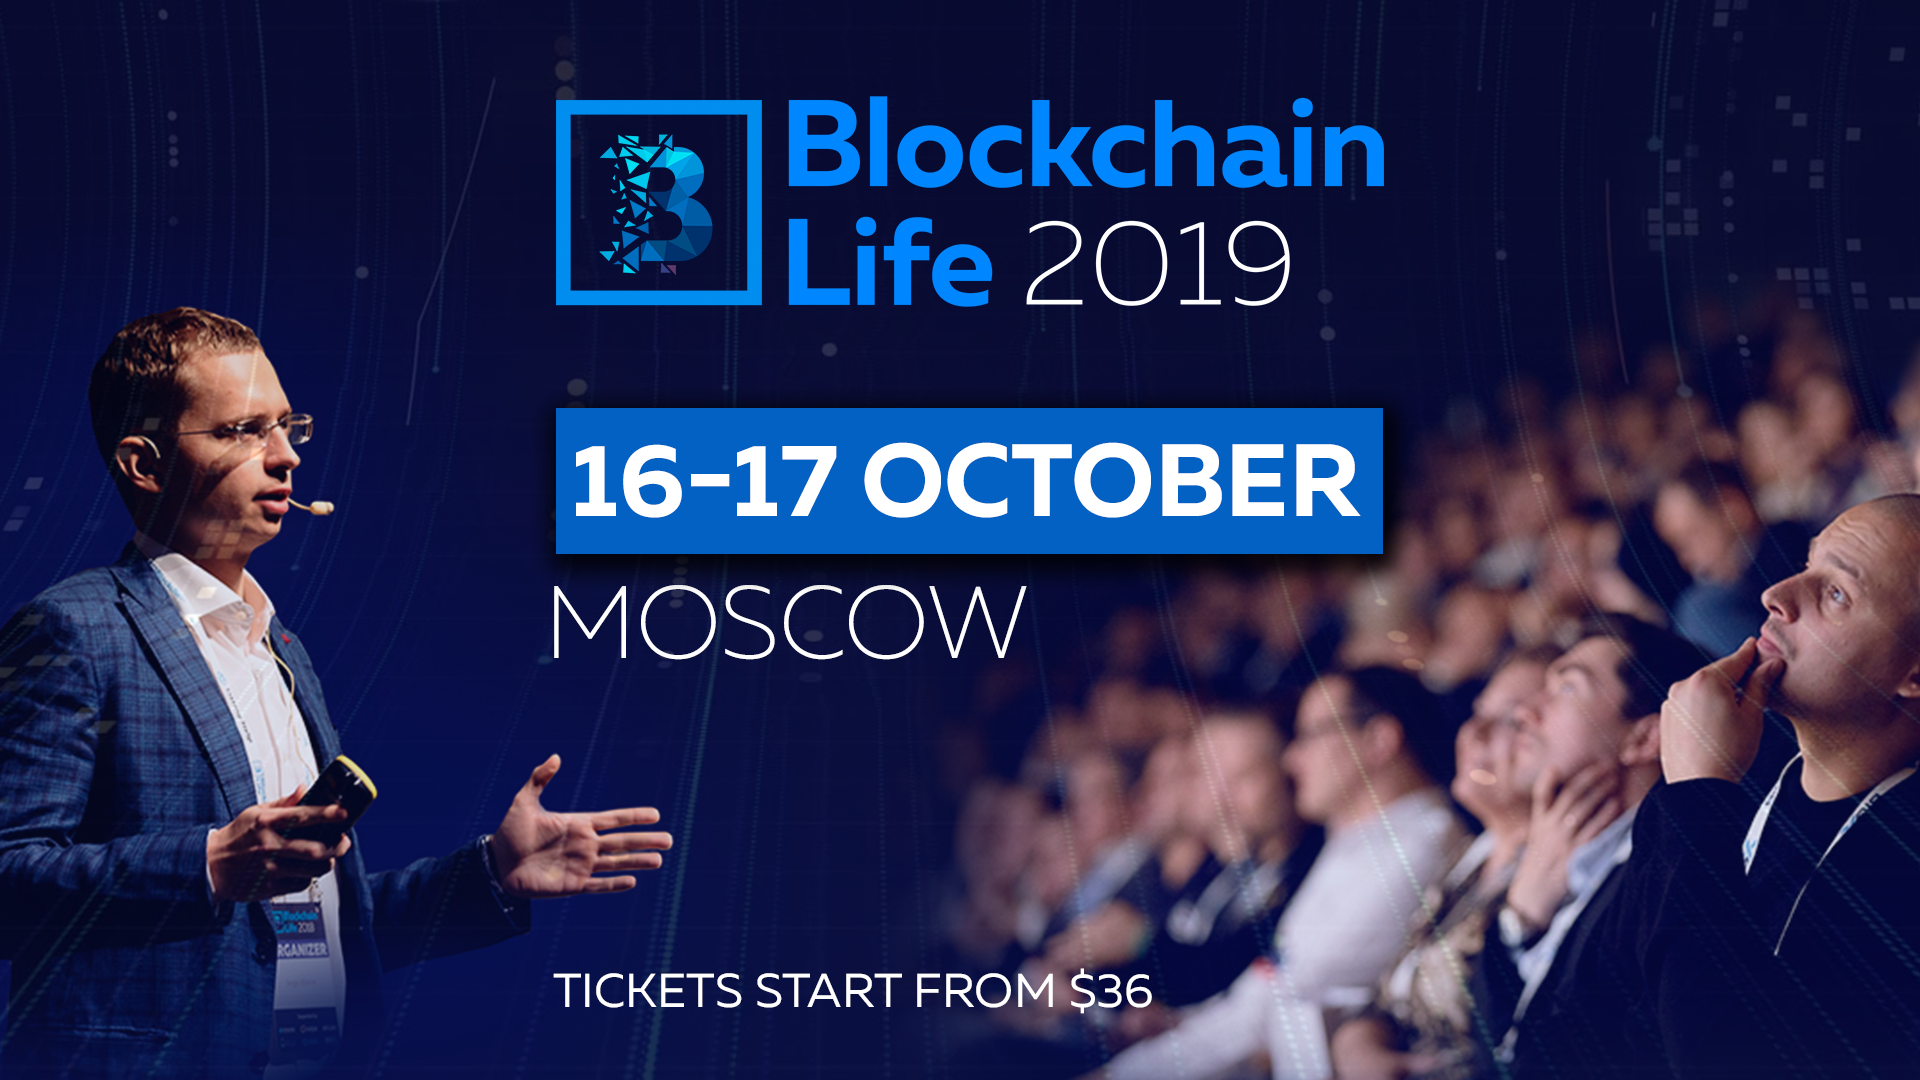 blockchain life 2019 conference moscow